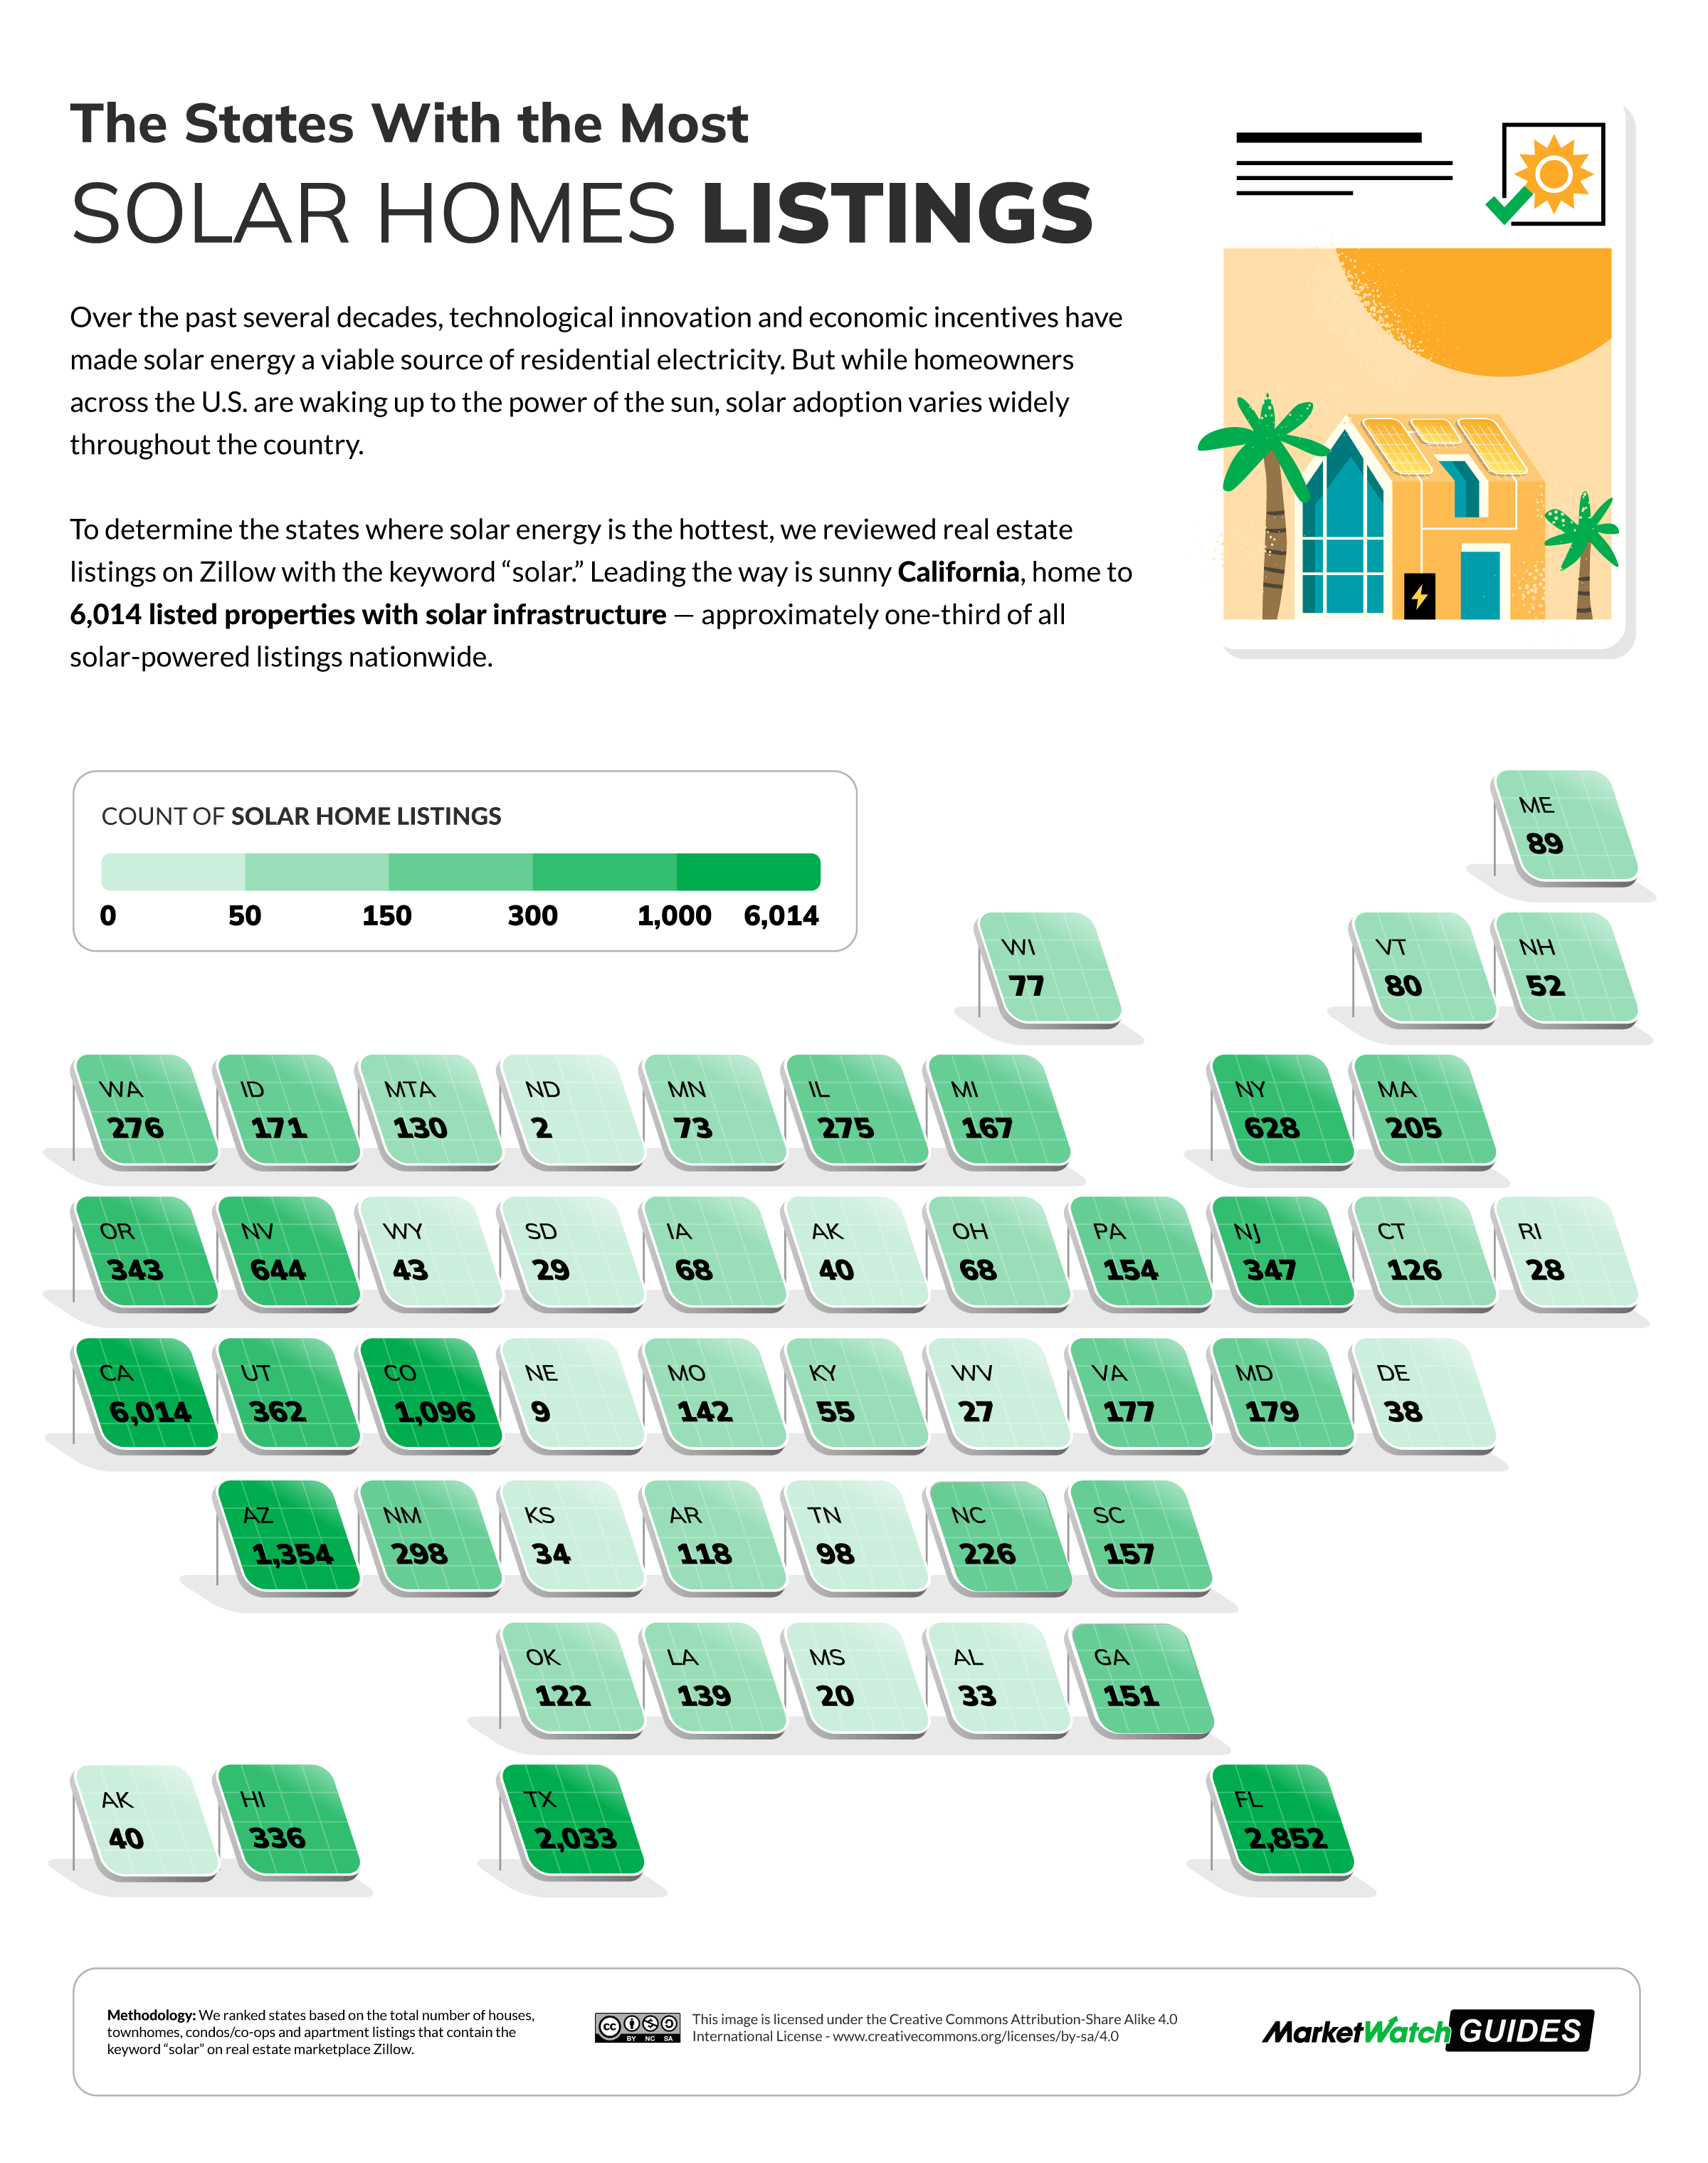 The States With the Most Solar Homes Listings